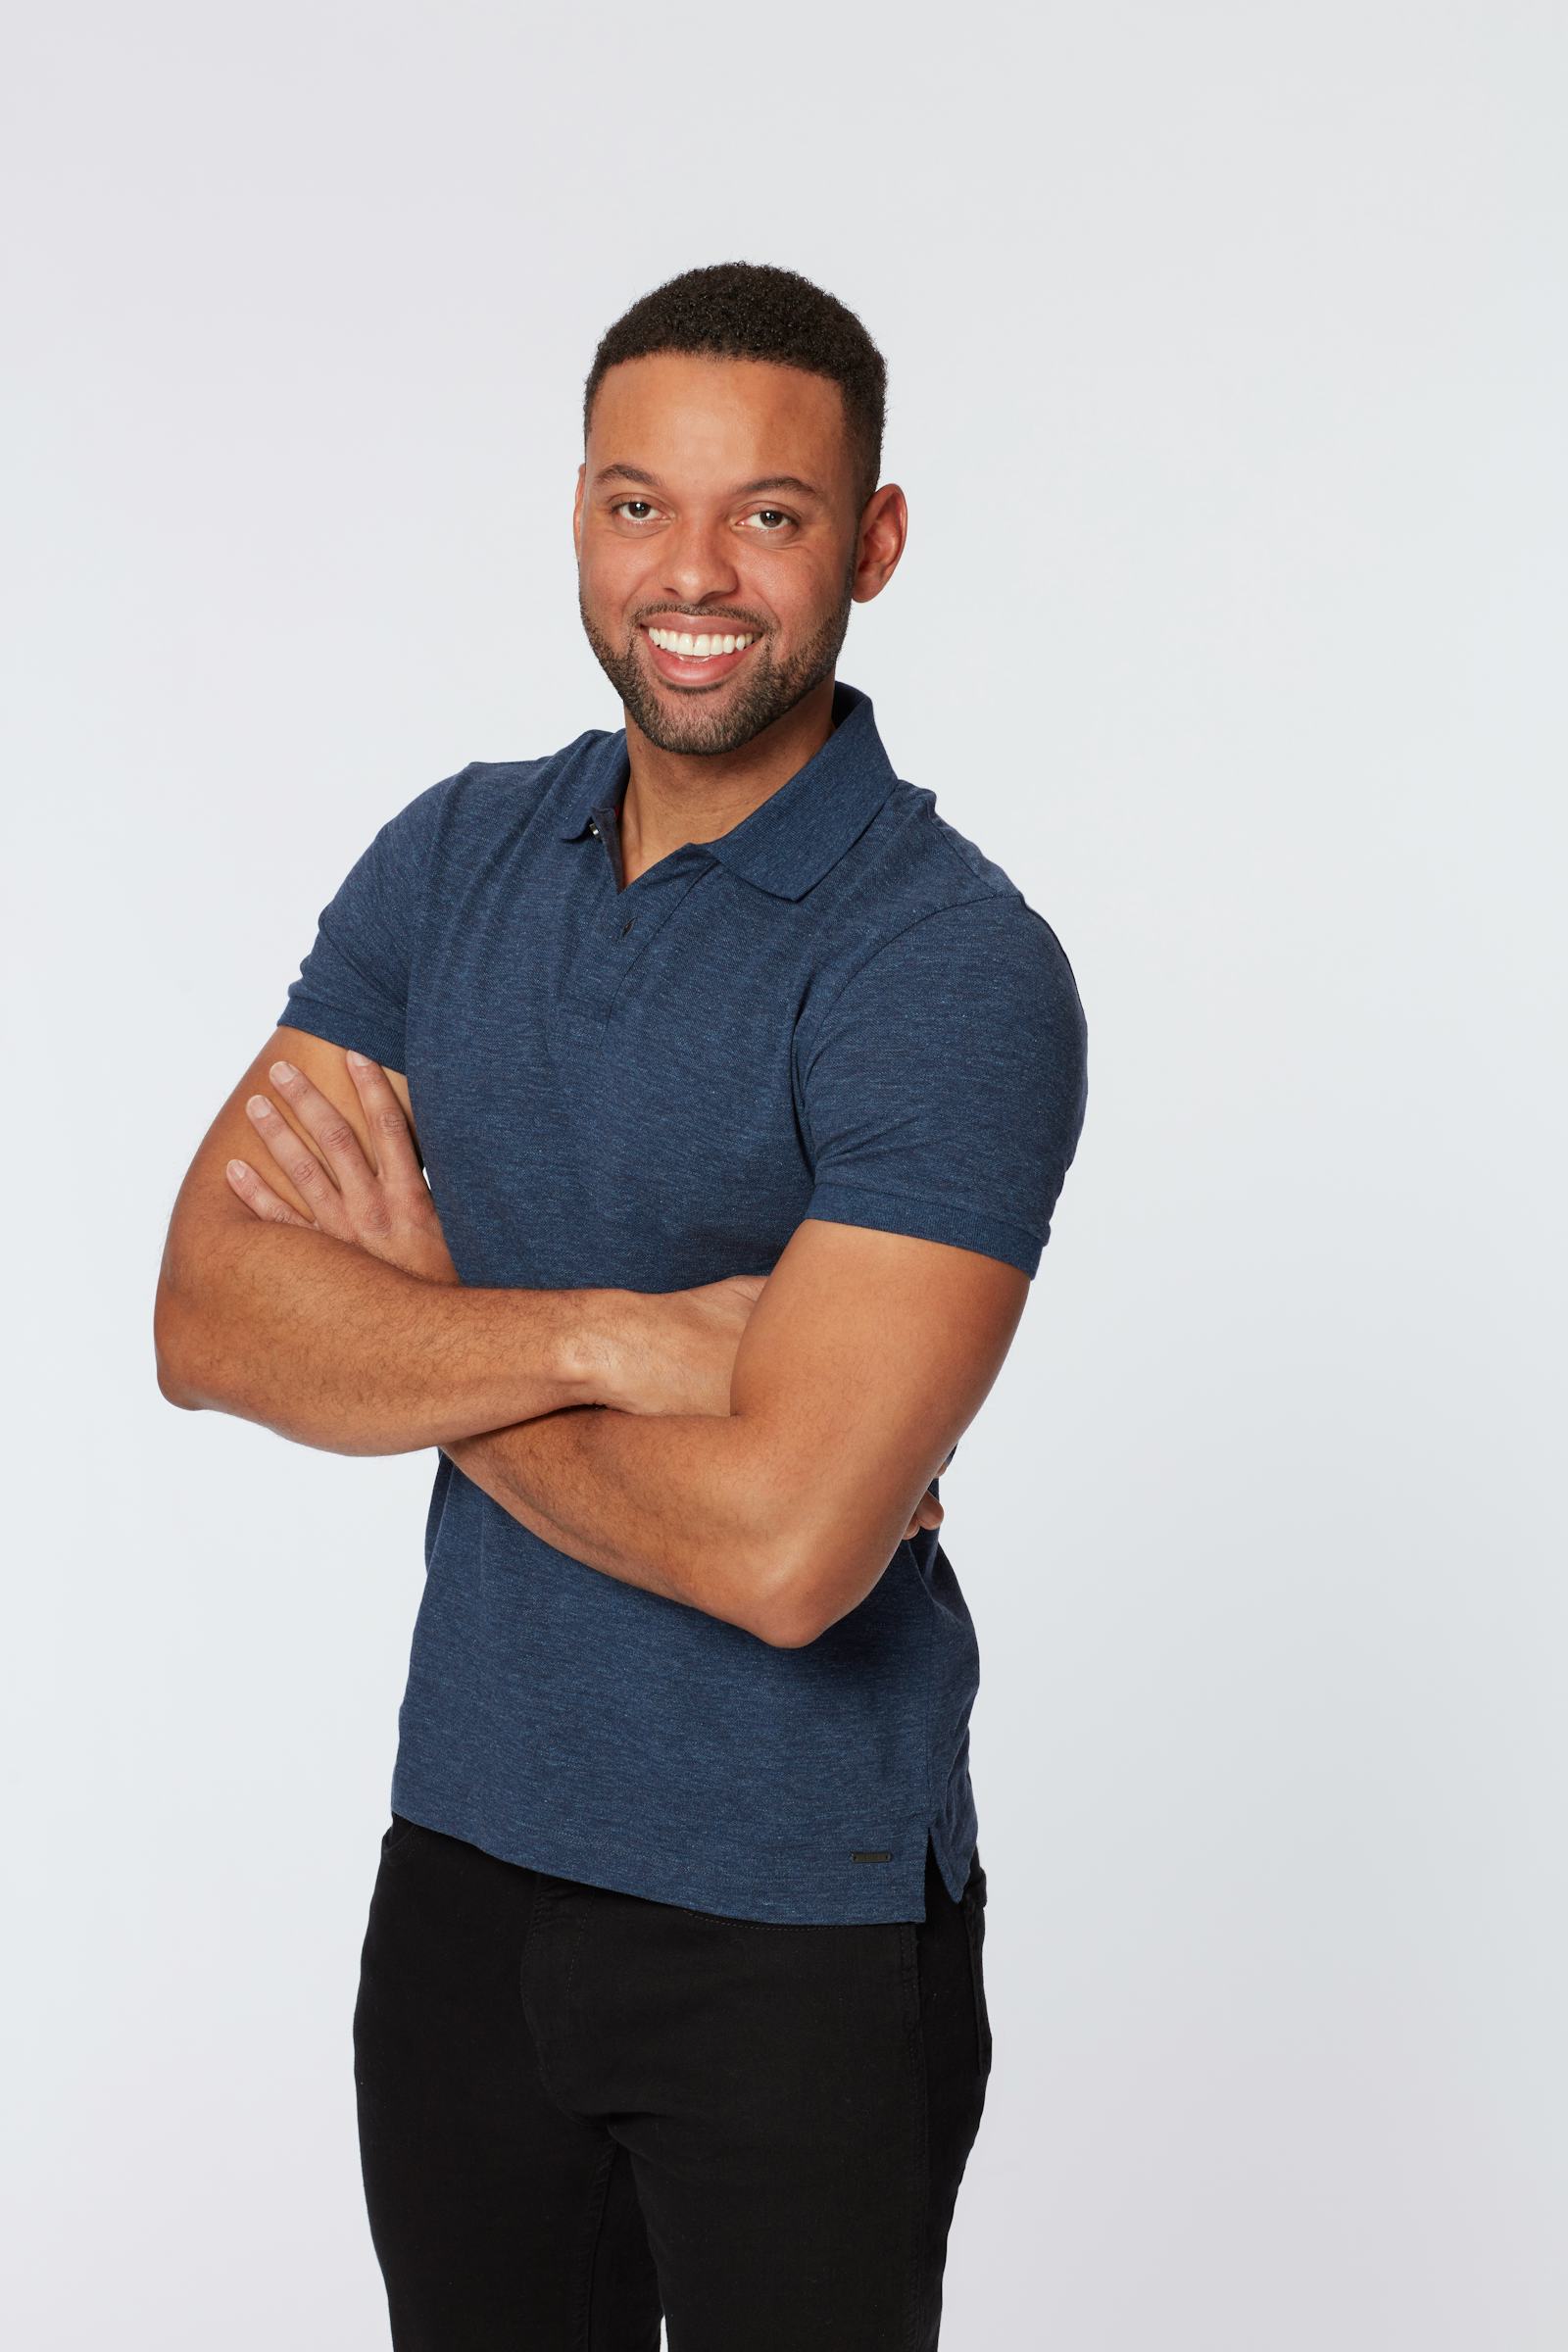 Karl Smith From 'The Bachelorette': Instagram, Job & What To Know